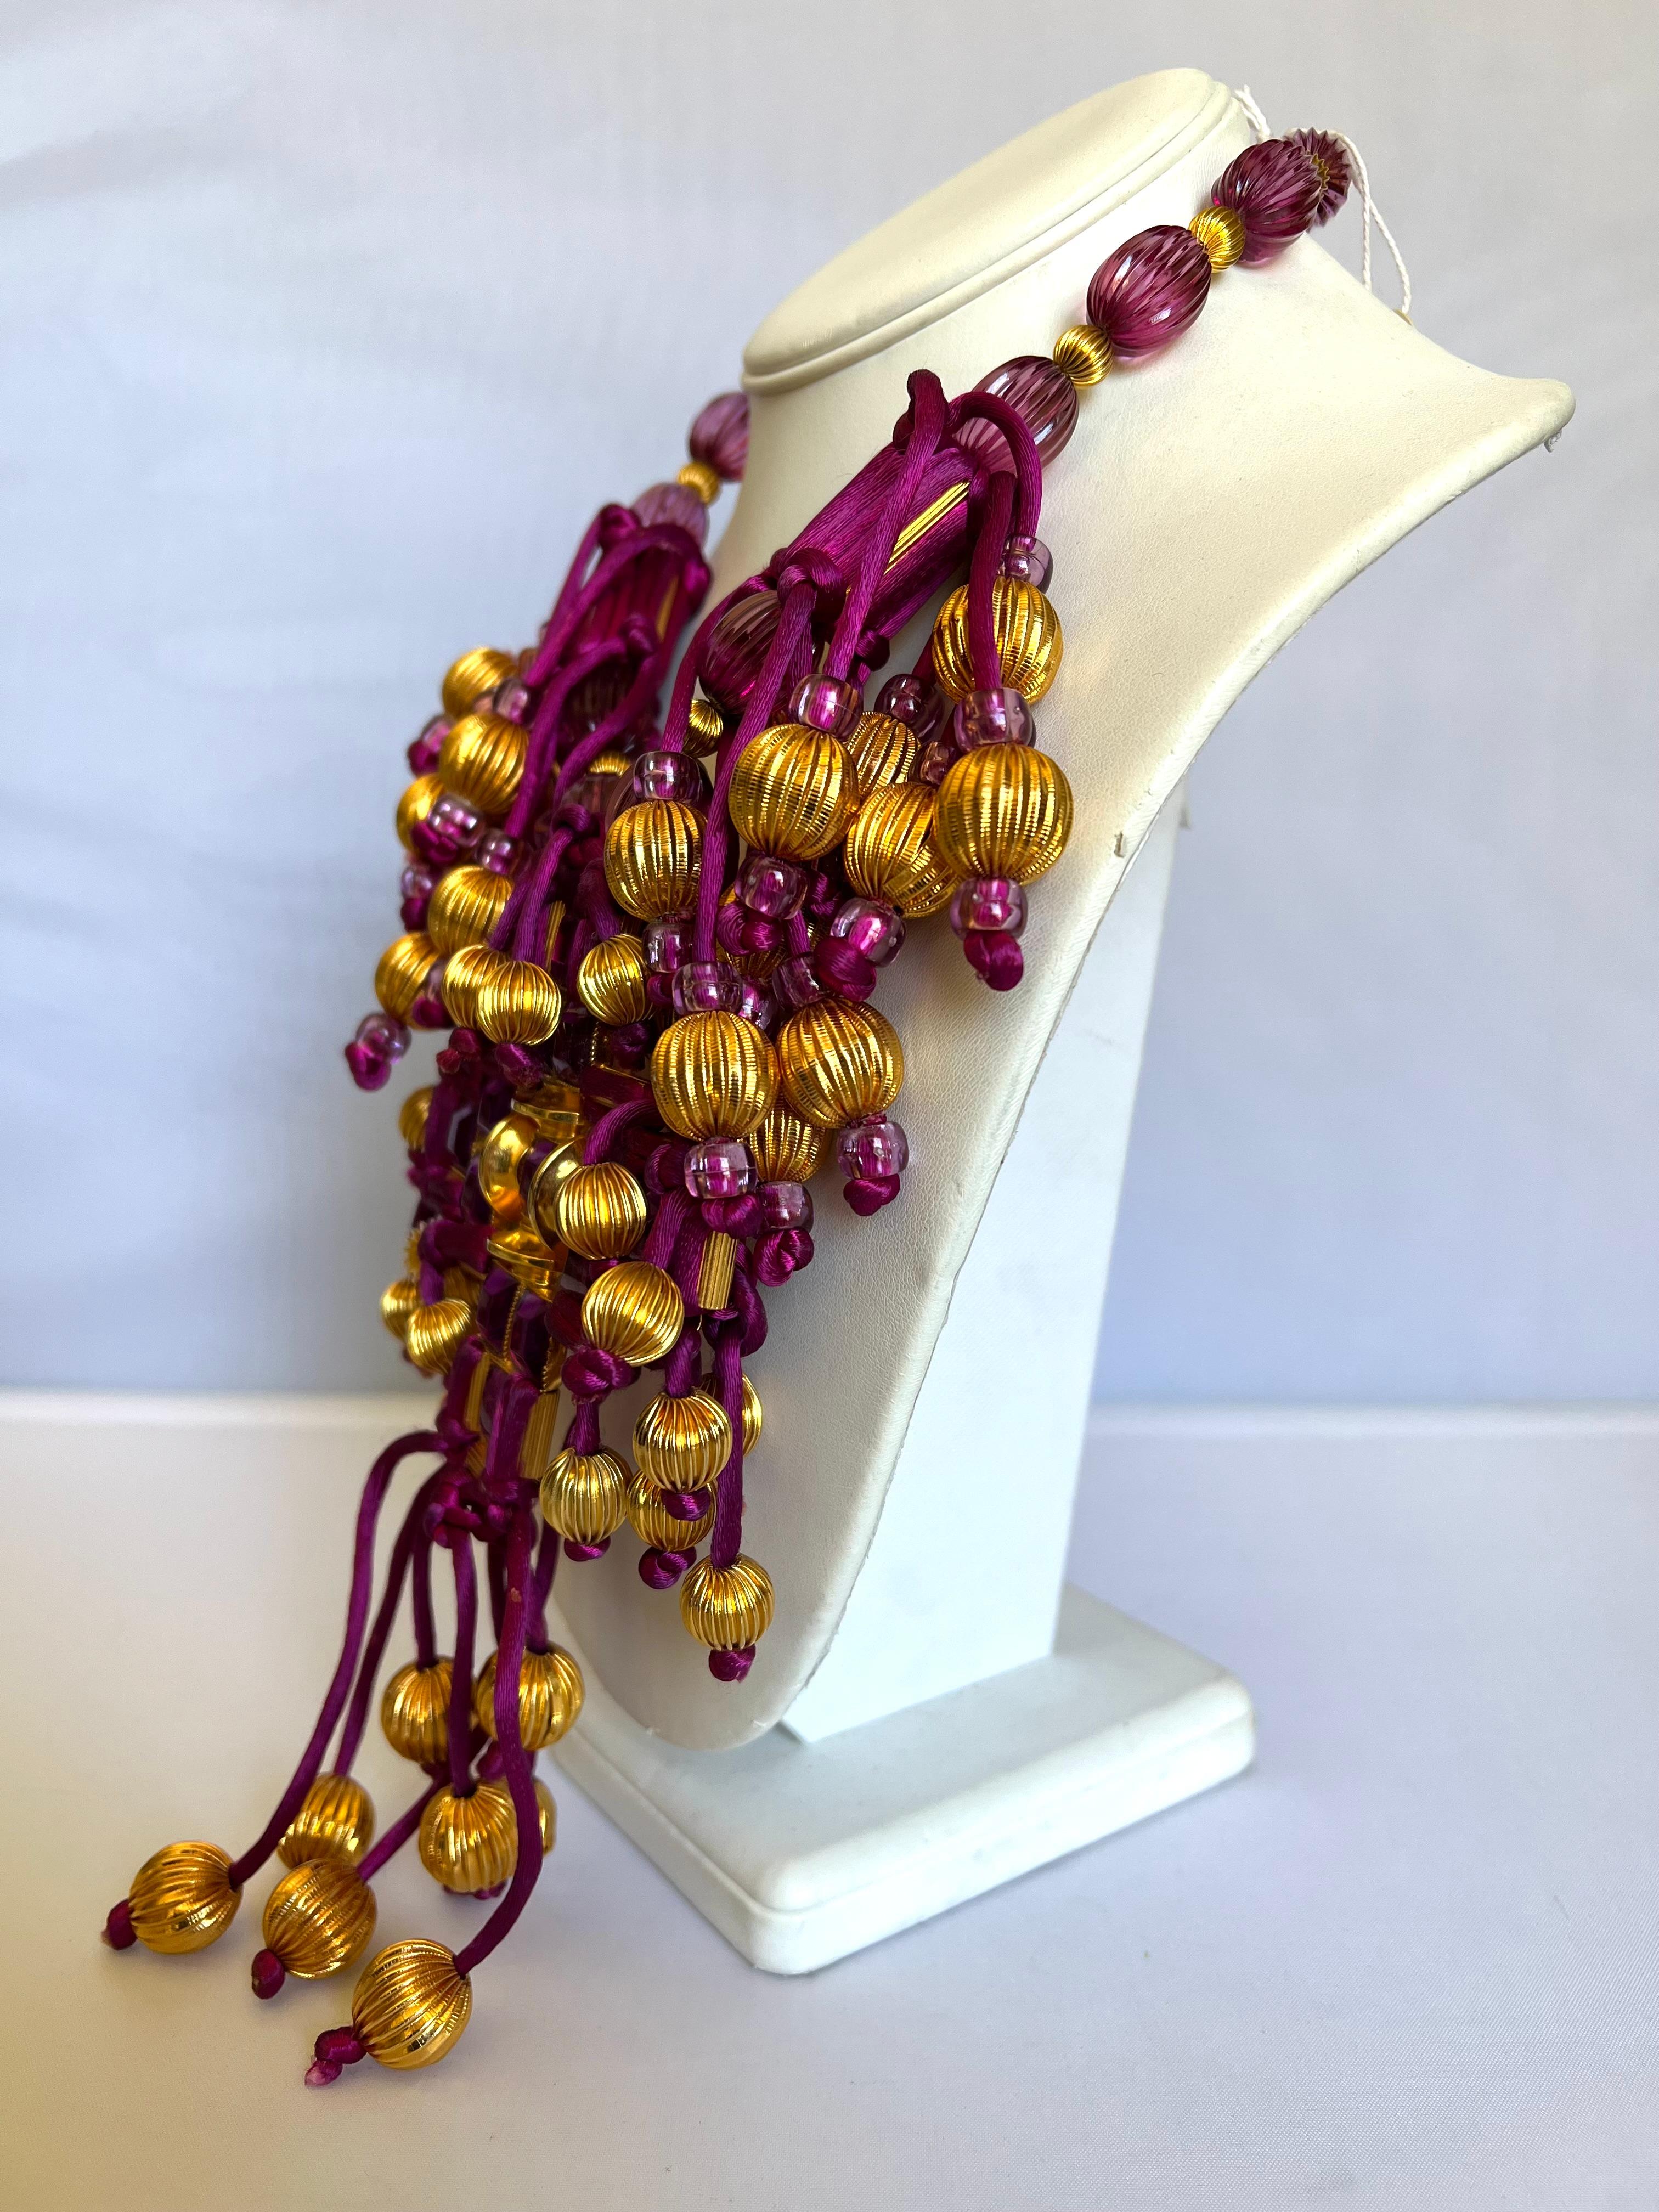 One-of-a-kind mixed material fringe statement necklace by William de Lillo/Robert F. Clark for Madame. Gres Haute Couture (spring/summer 1975). The museum-quality necklace features mixed materials such as purple silk tassels, large gold-tone ribbed